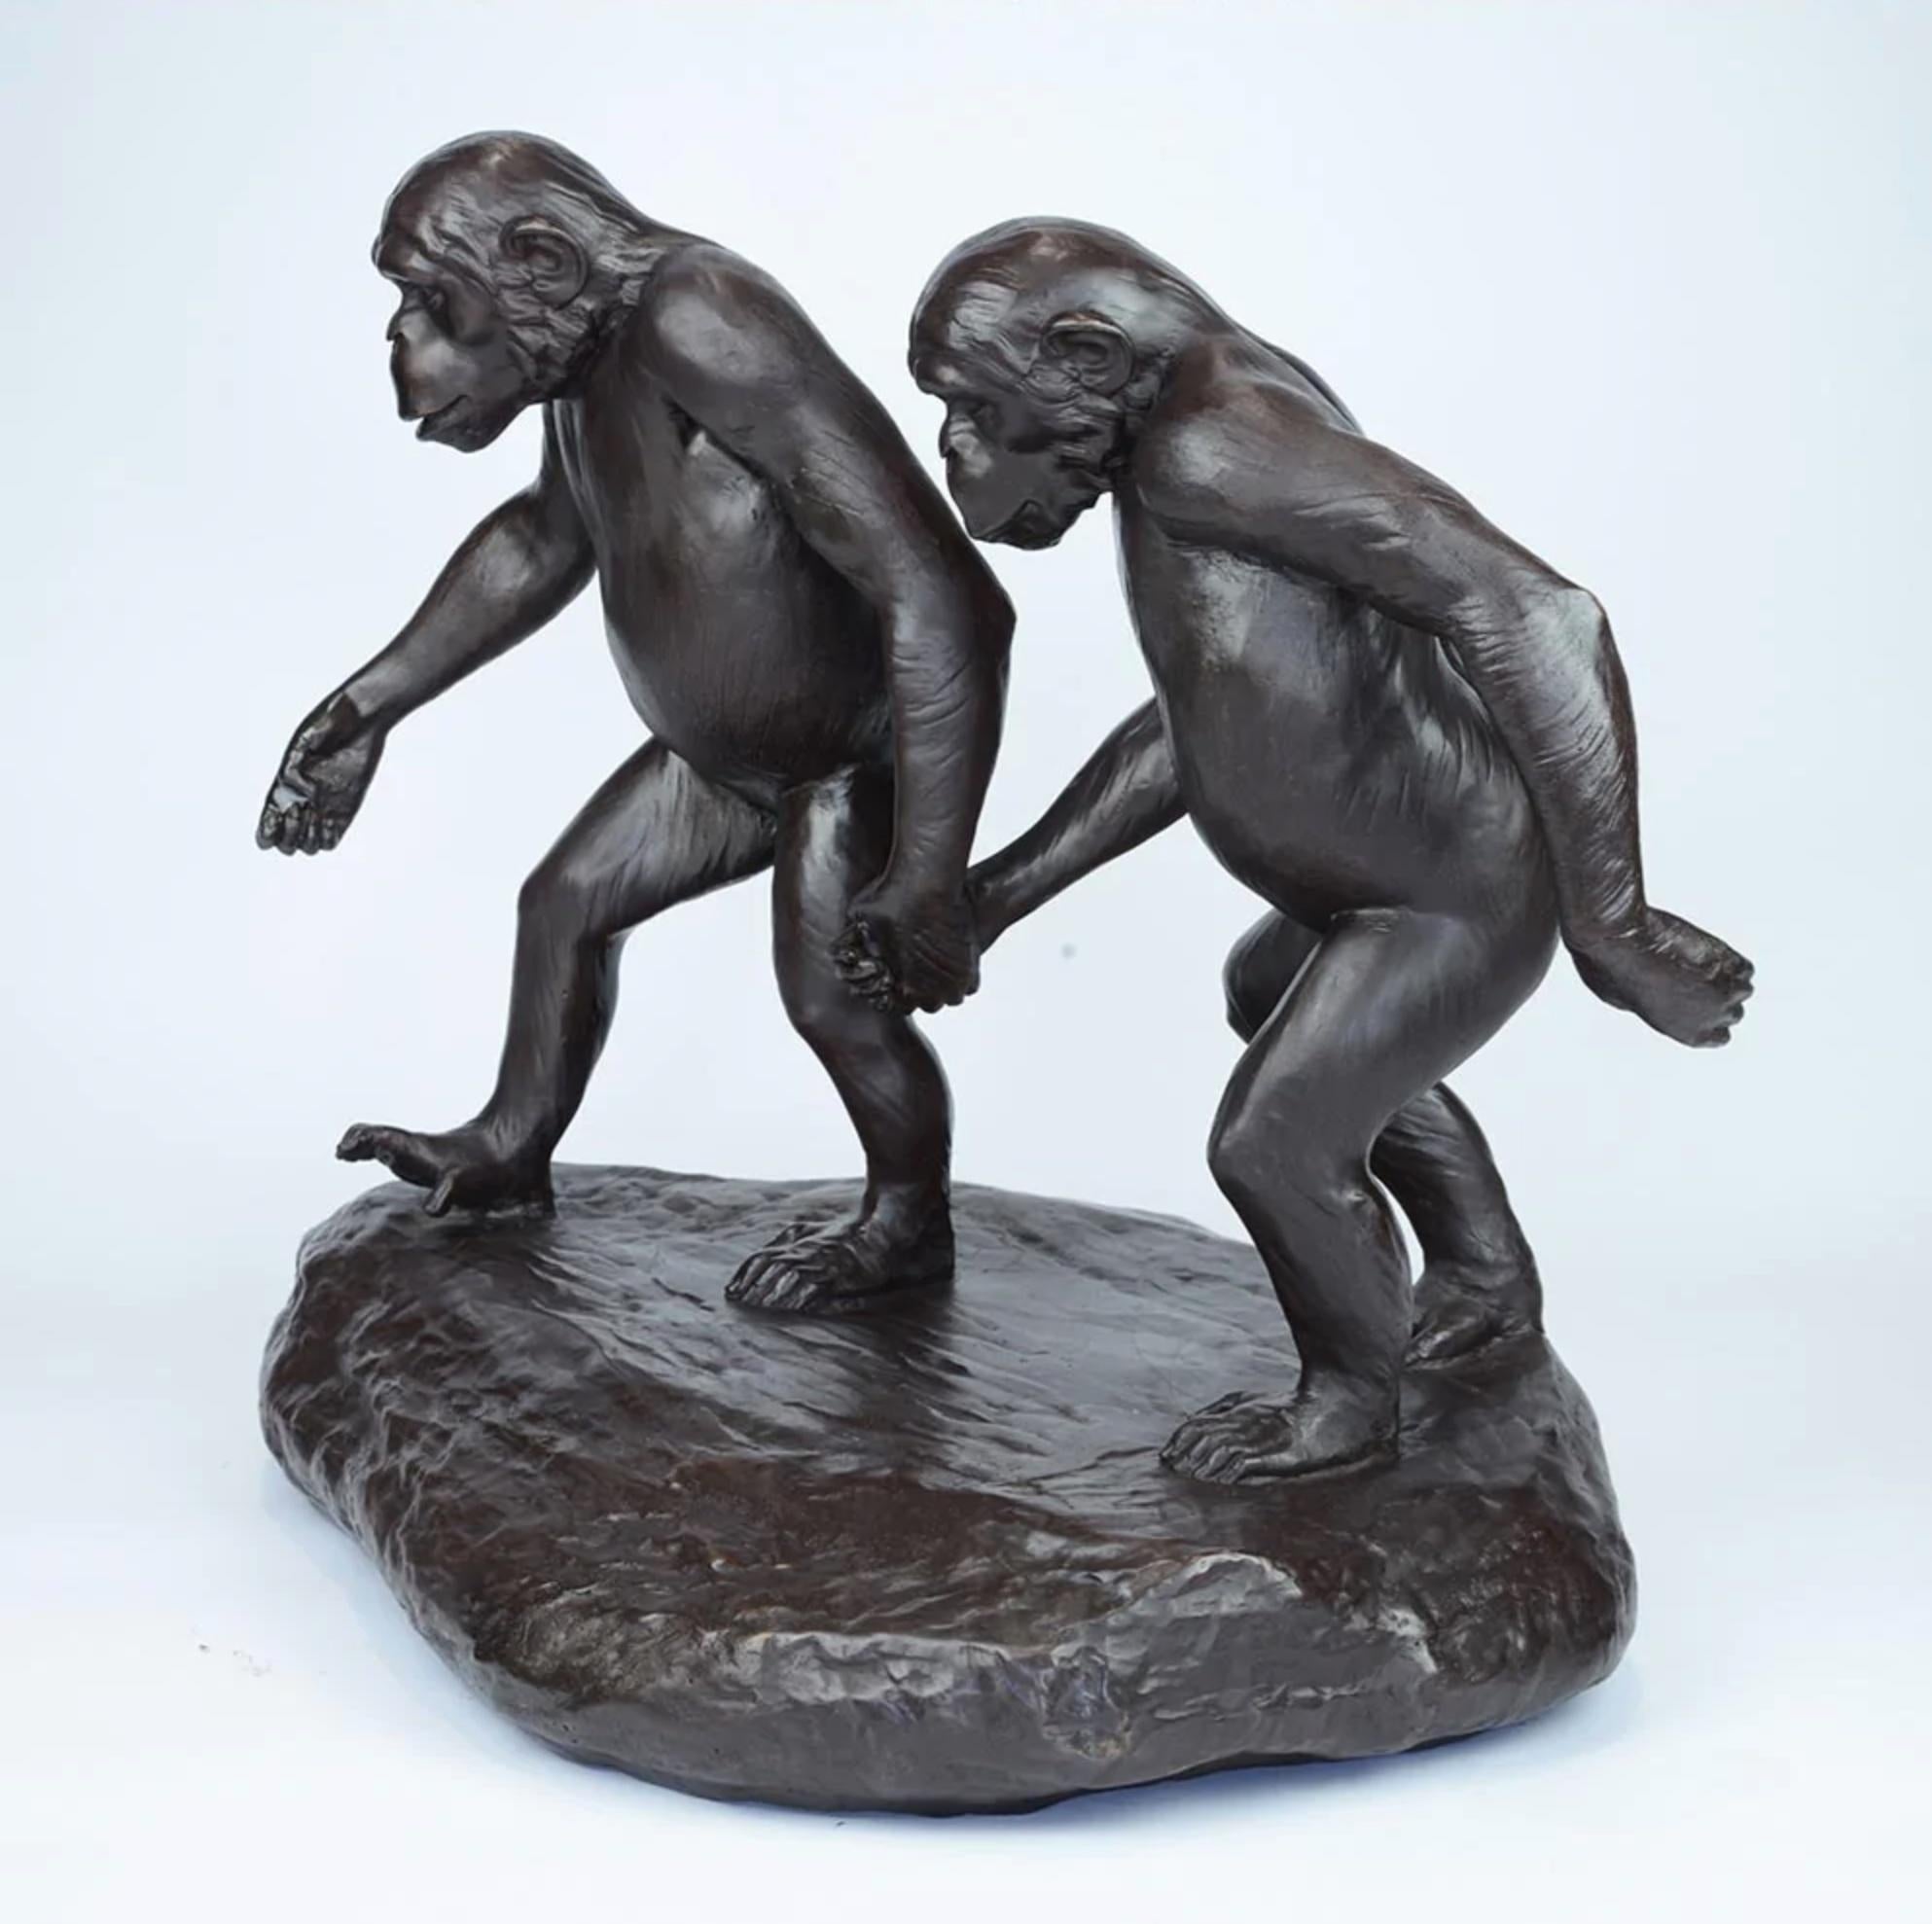 Authentic Bronze Chimp Friendship Medium Sculpture by Gillie and Marc  - Contemporary Art by Gillie and Marc Schattner